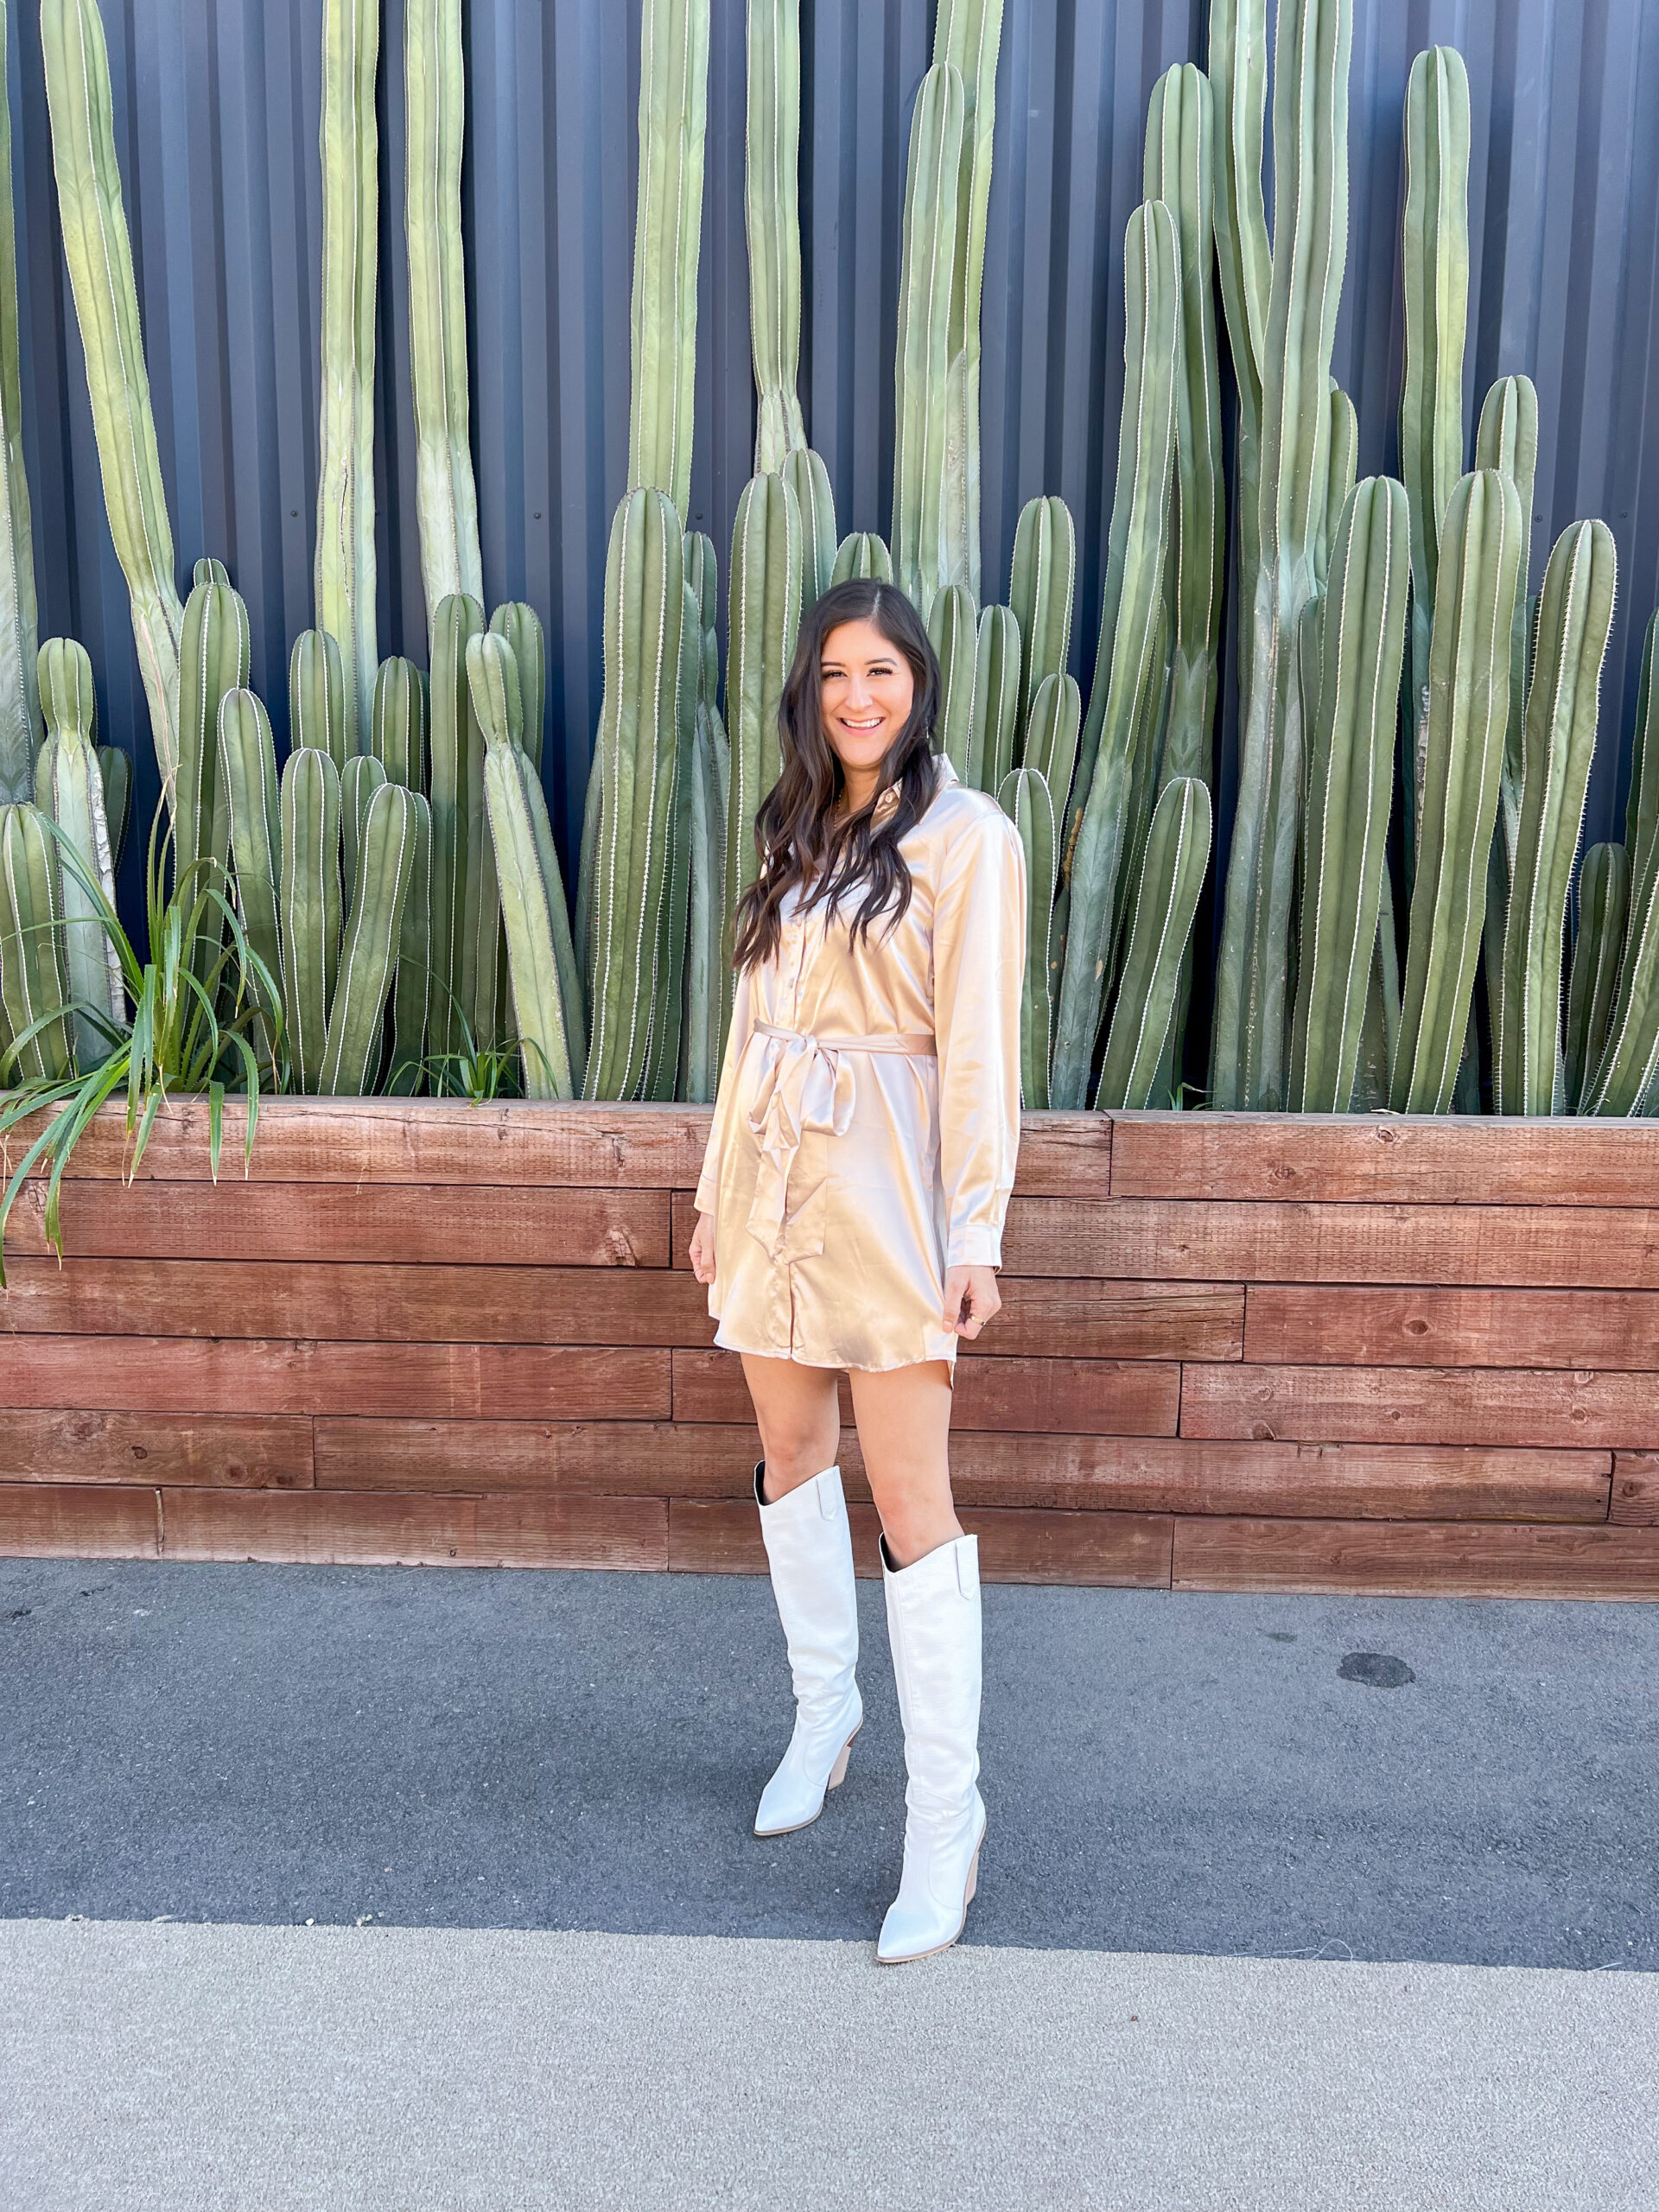 How To Wear Cowboy Boots For Women My Favorite Street Style Looks -  ShoesOutfitIdeas.com